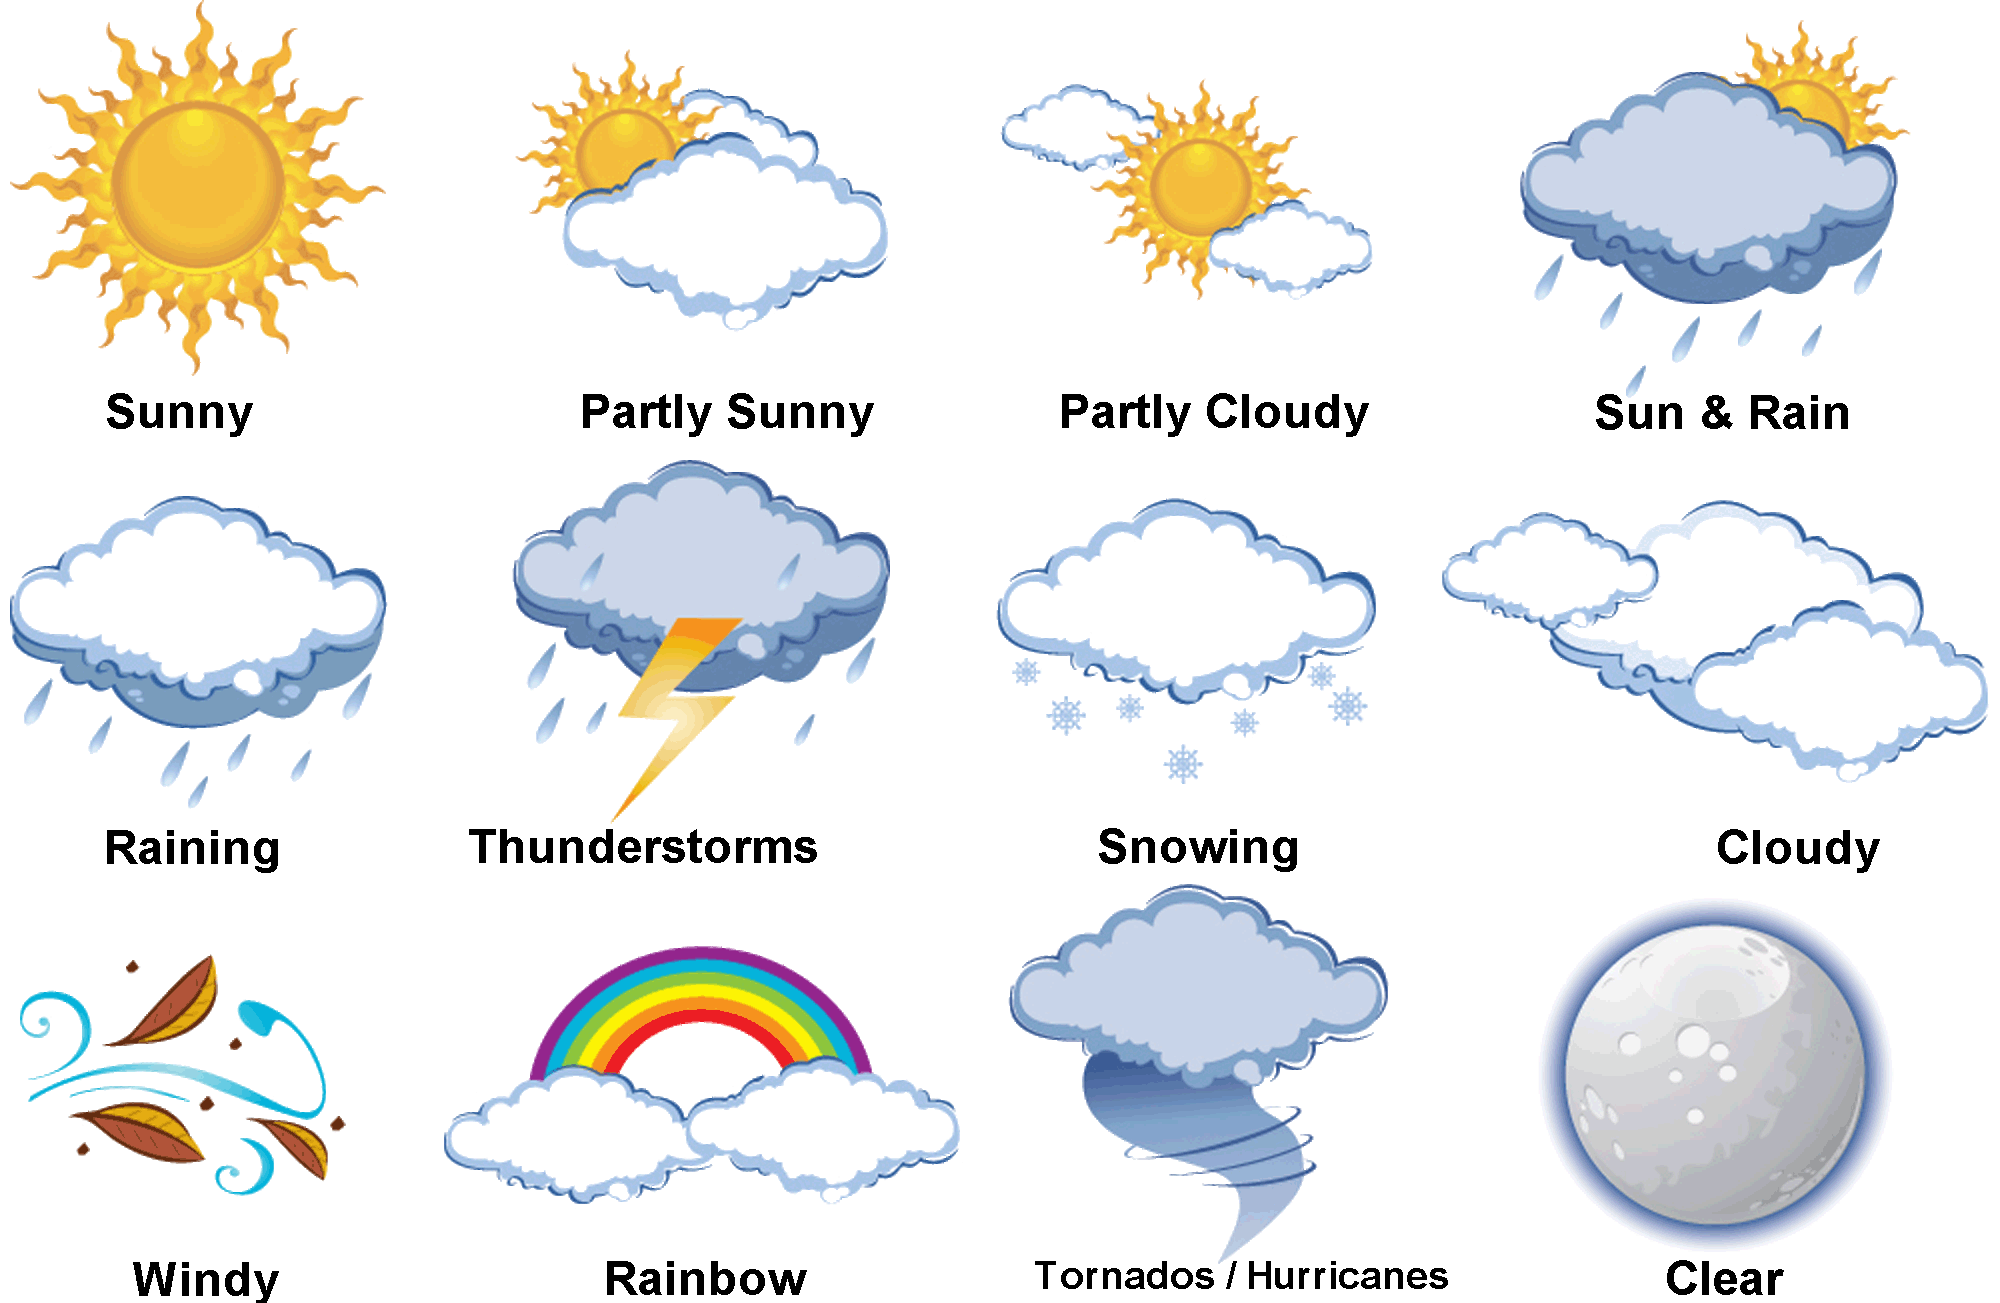 Vocabuary and Idioms about Rain